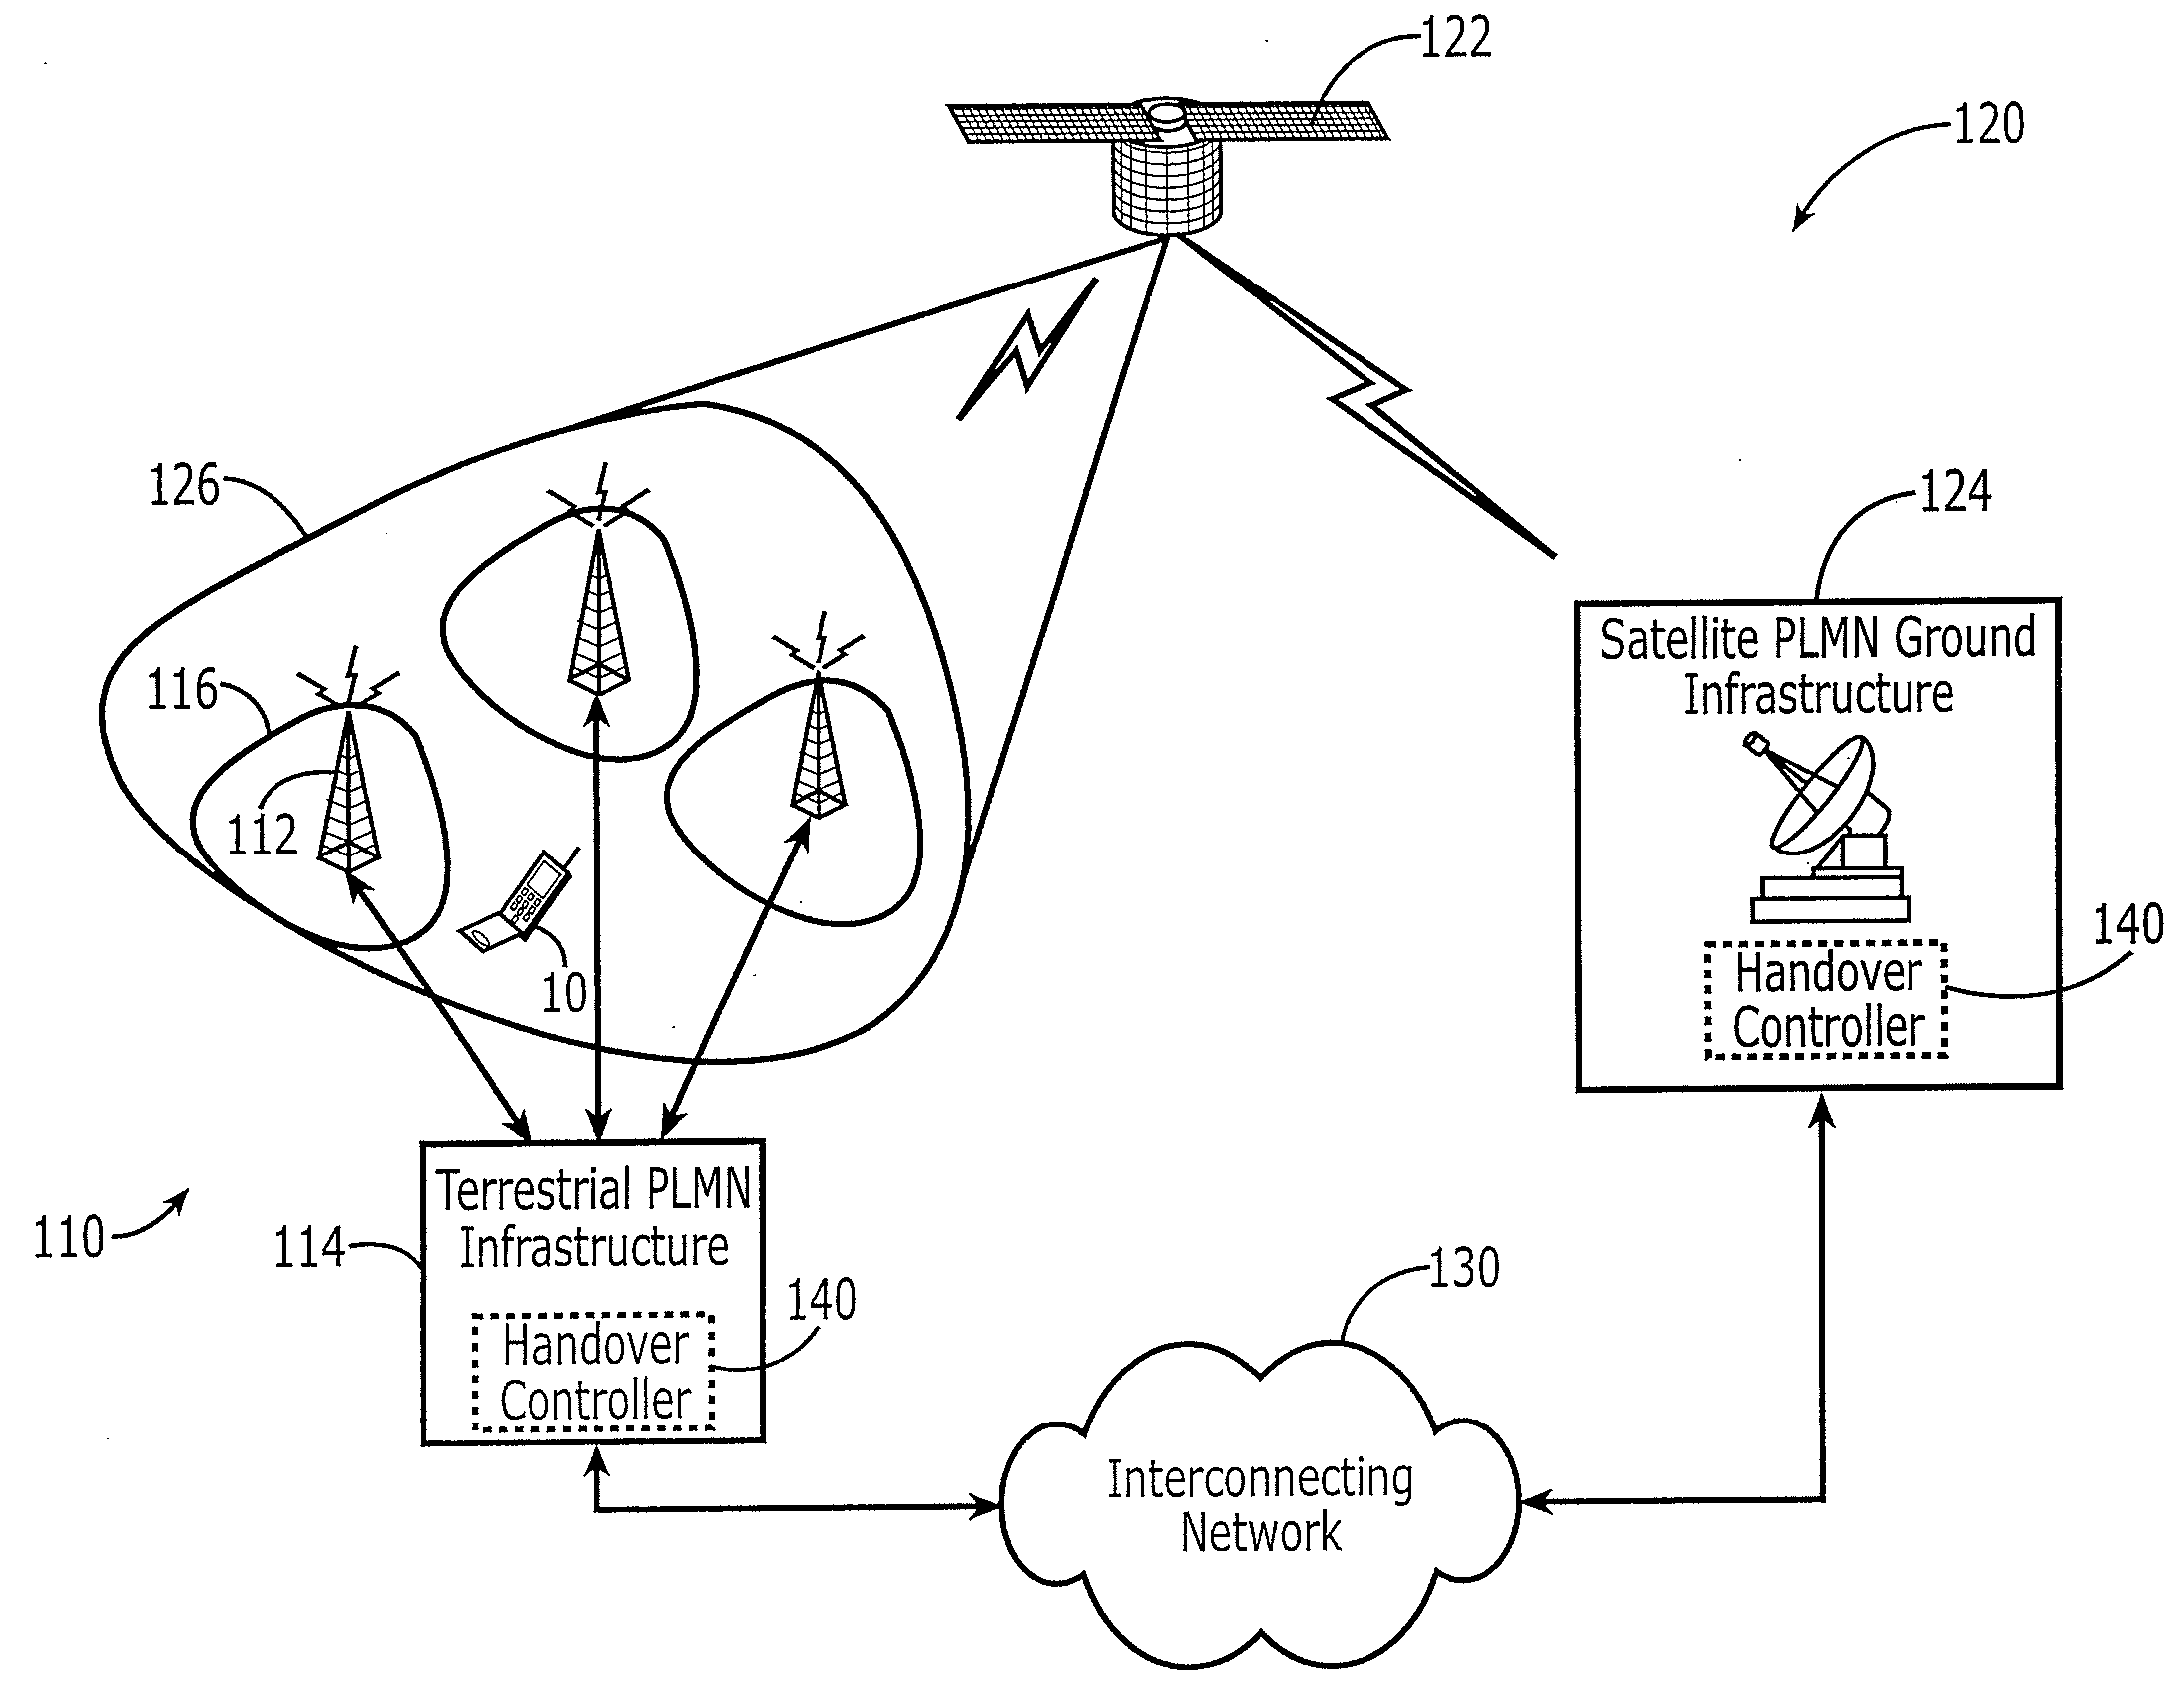 Systems, methods and computer program products for mobility management in hybrid satellite/terrestrial wireless communications systems